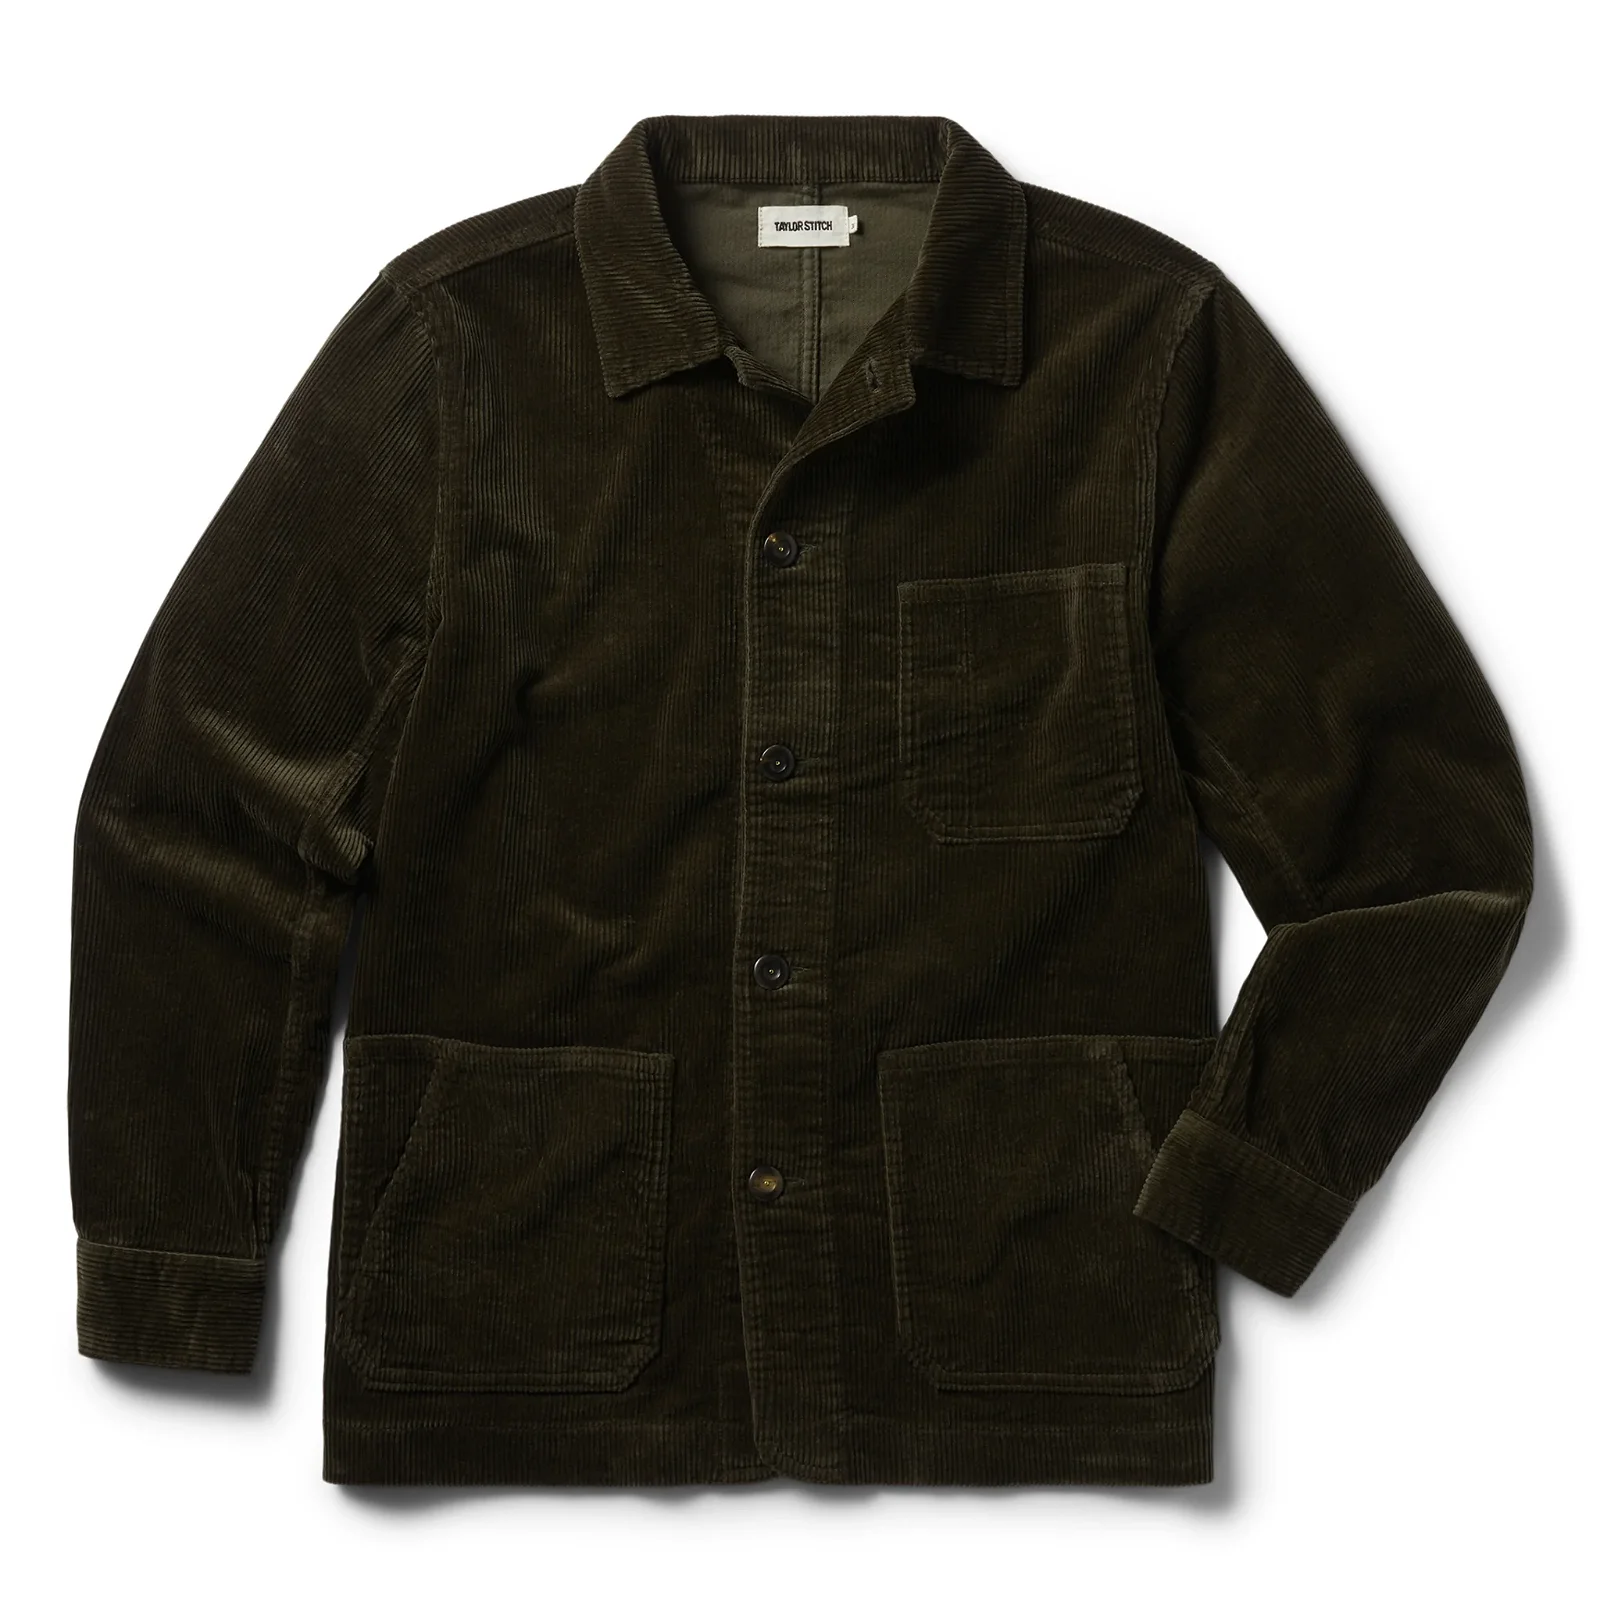 Image of The Ojai Jacket in Army Cord